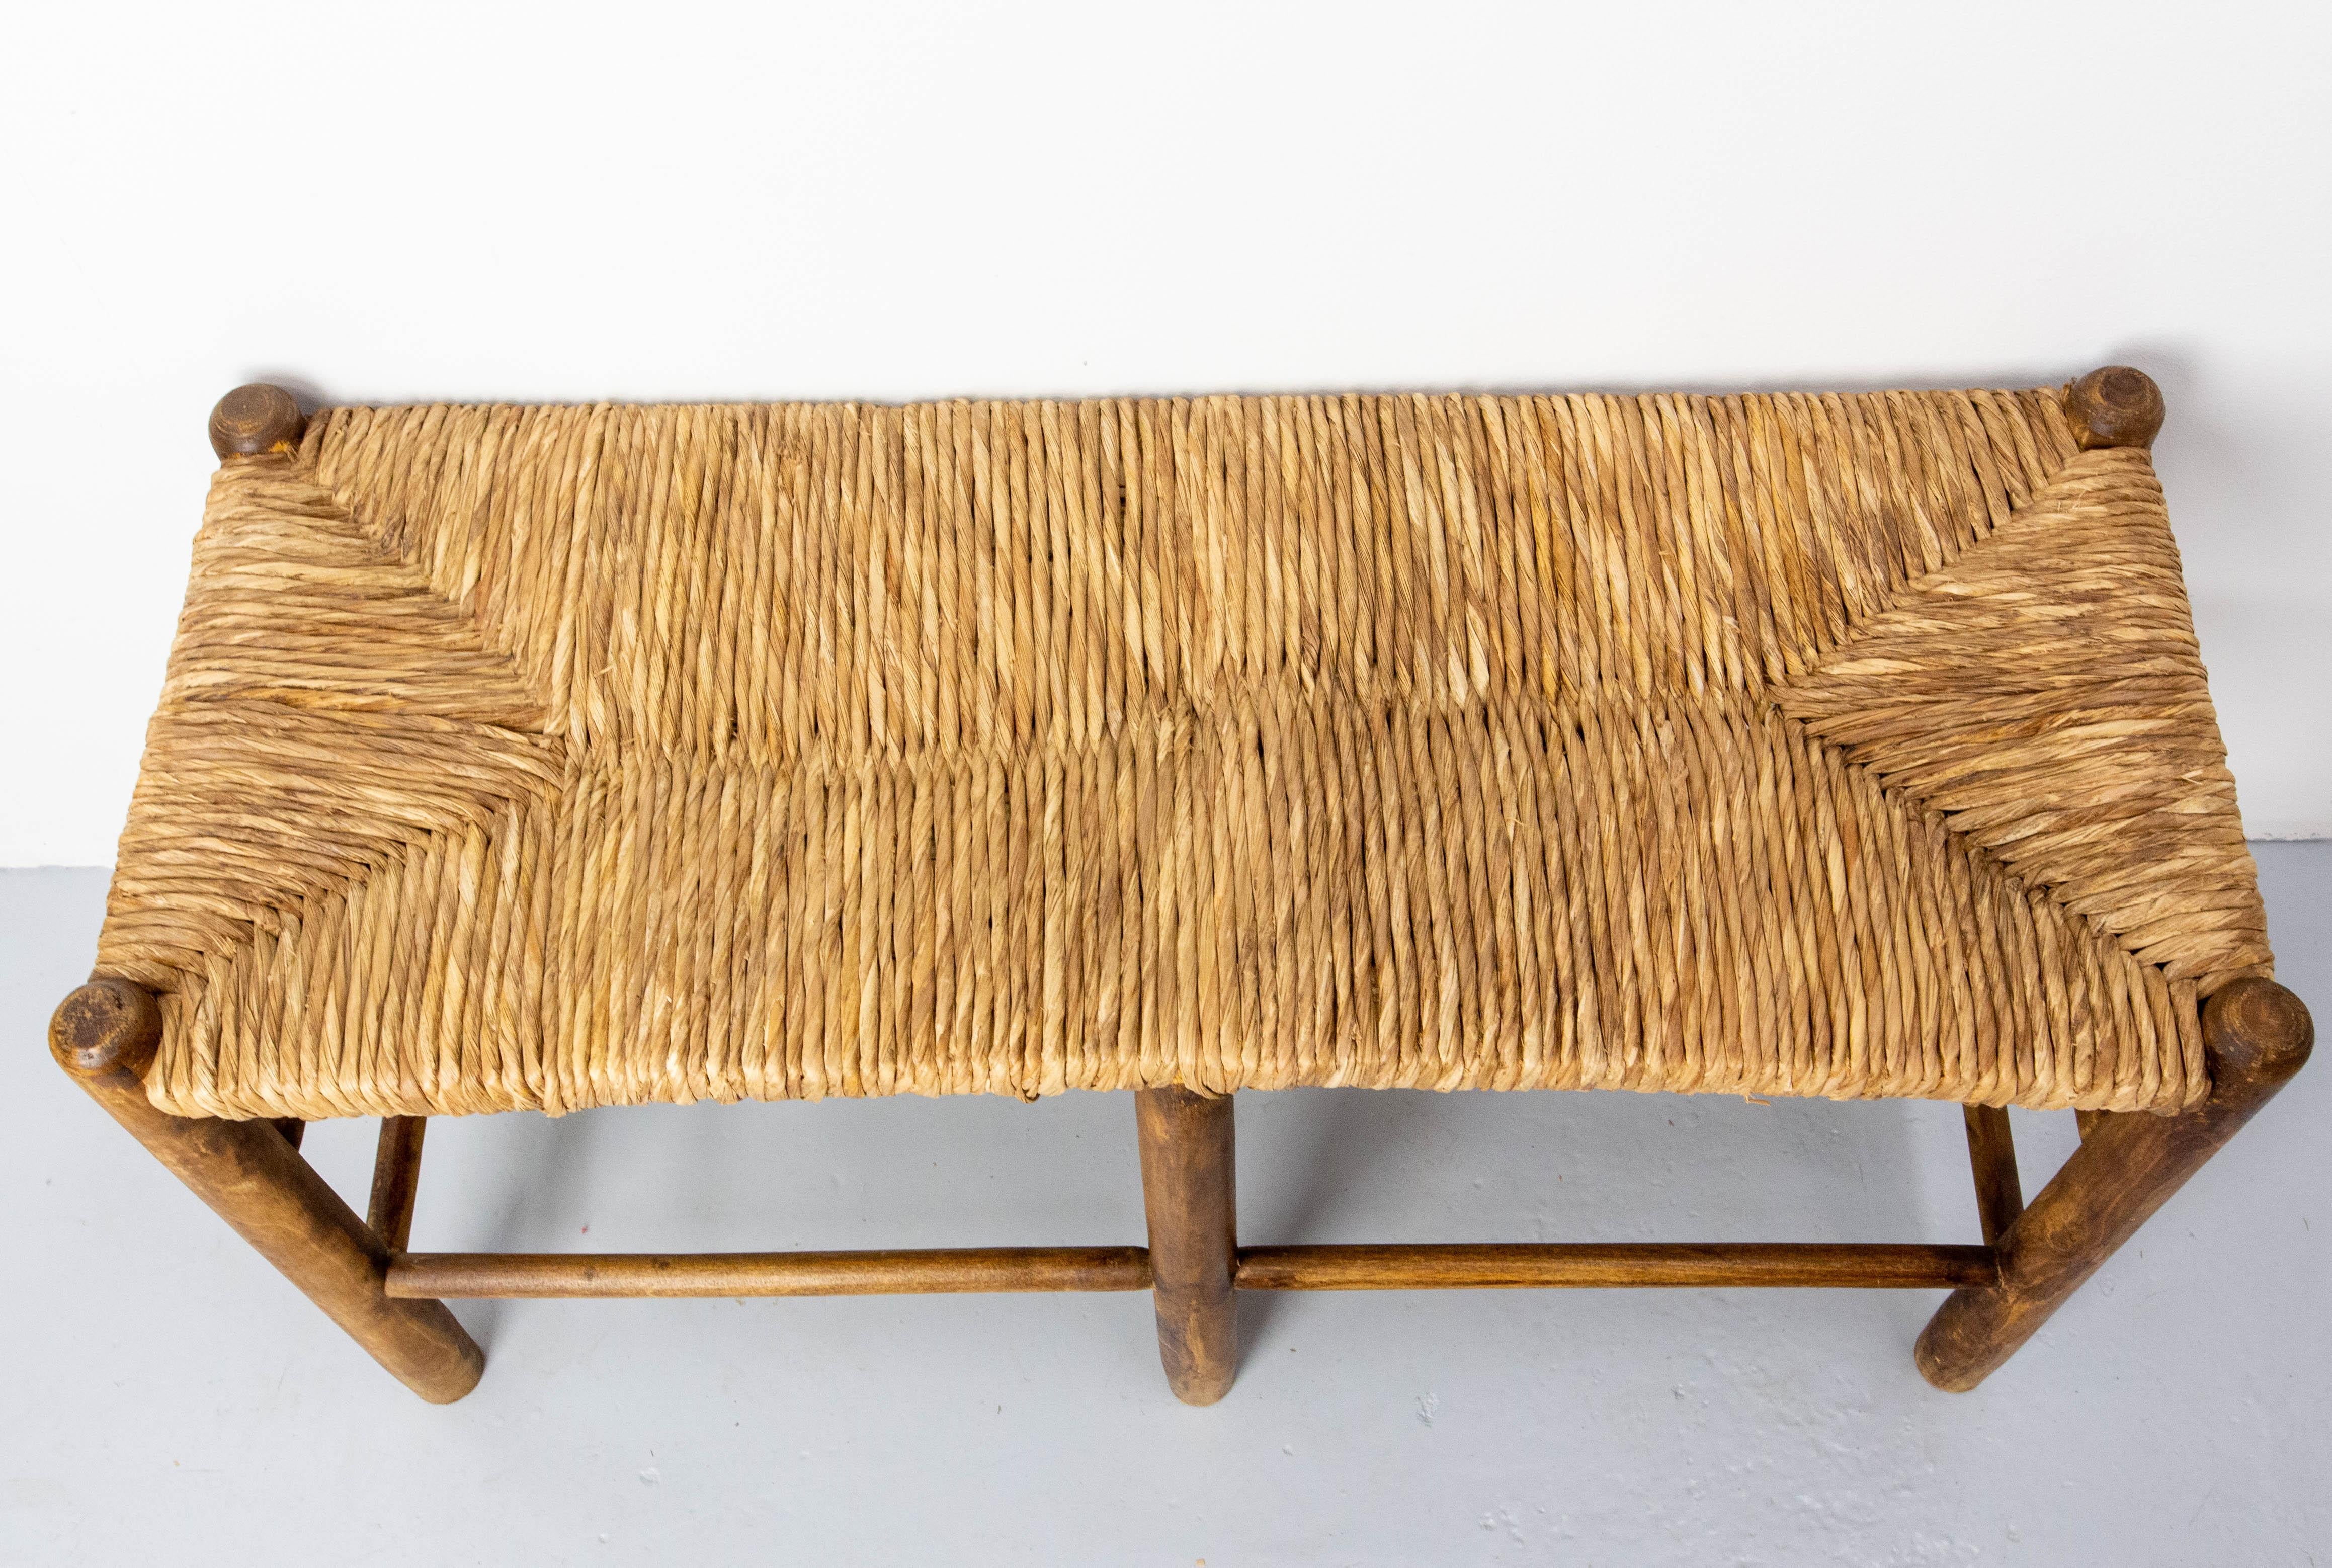 20th Century French Bench Poplar & Staw in the Charlotte Perriand style, circa 1950